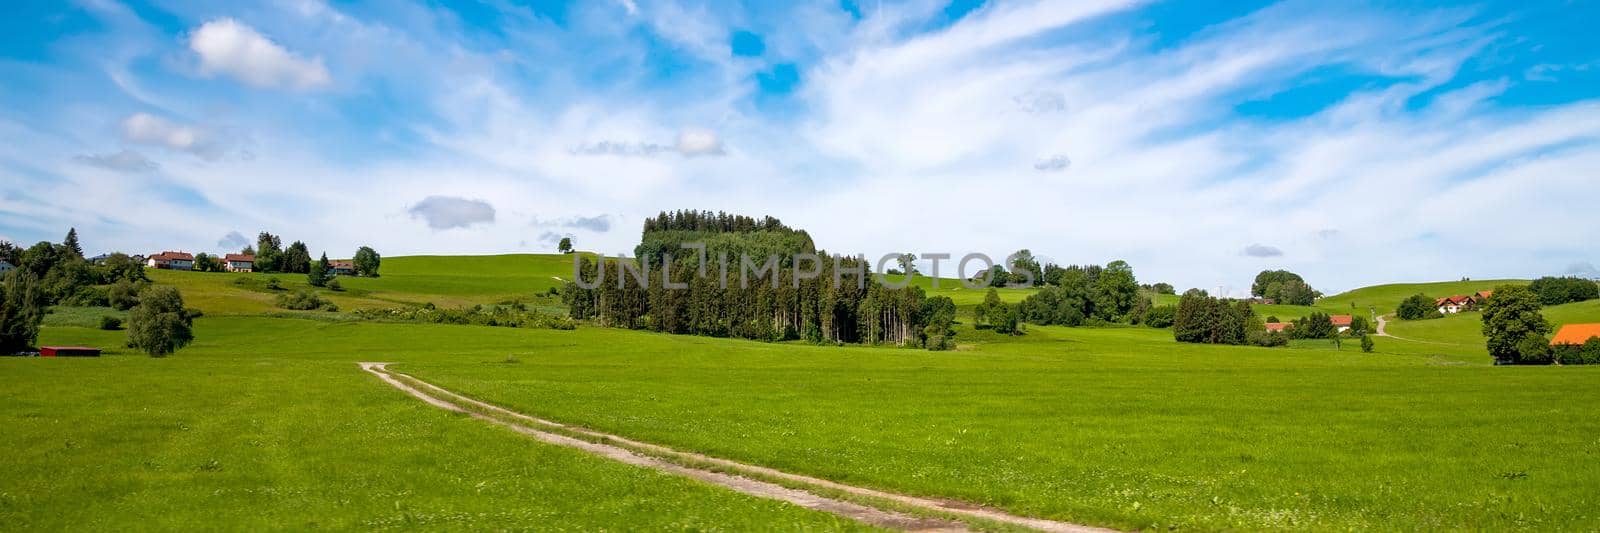 Panoramic view of green countryside and country road